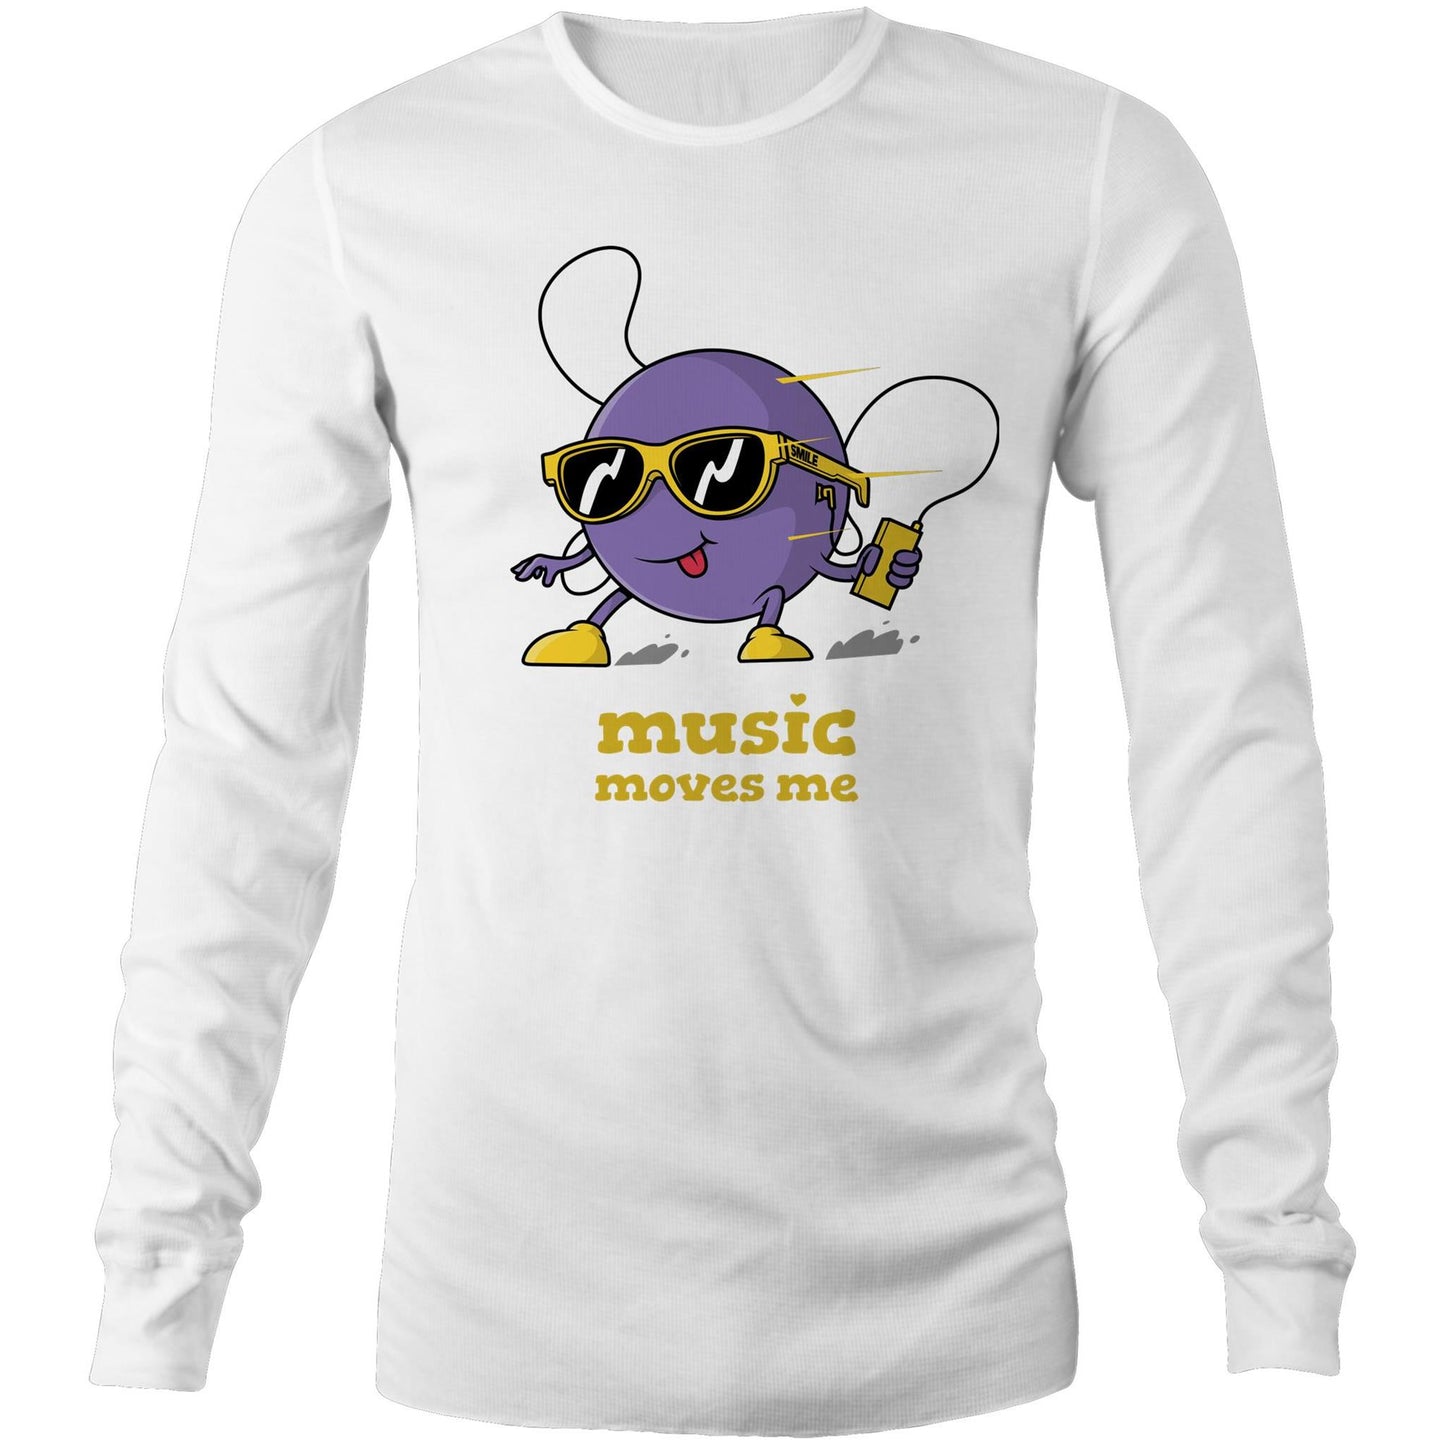 Music Moves Me, Earbuds - Long Sleeve T-Shirt White Unisex Long Sleeve T-shirt Music